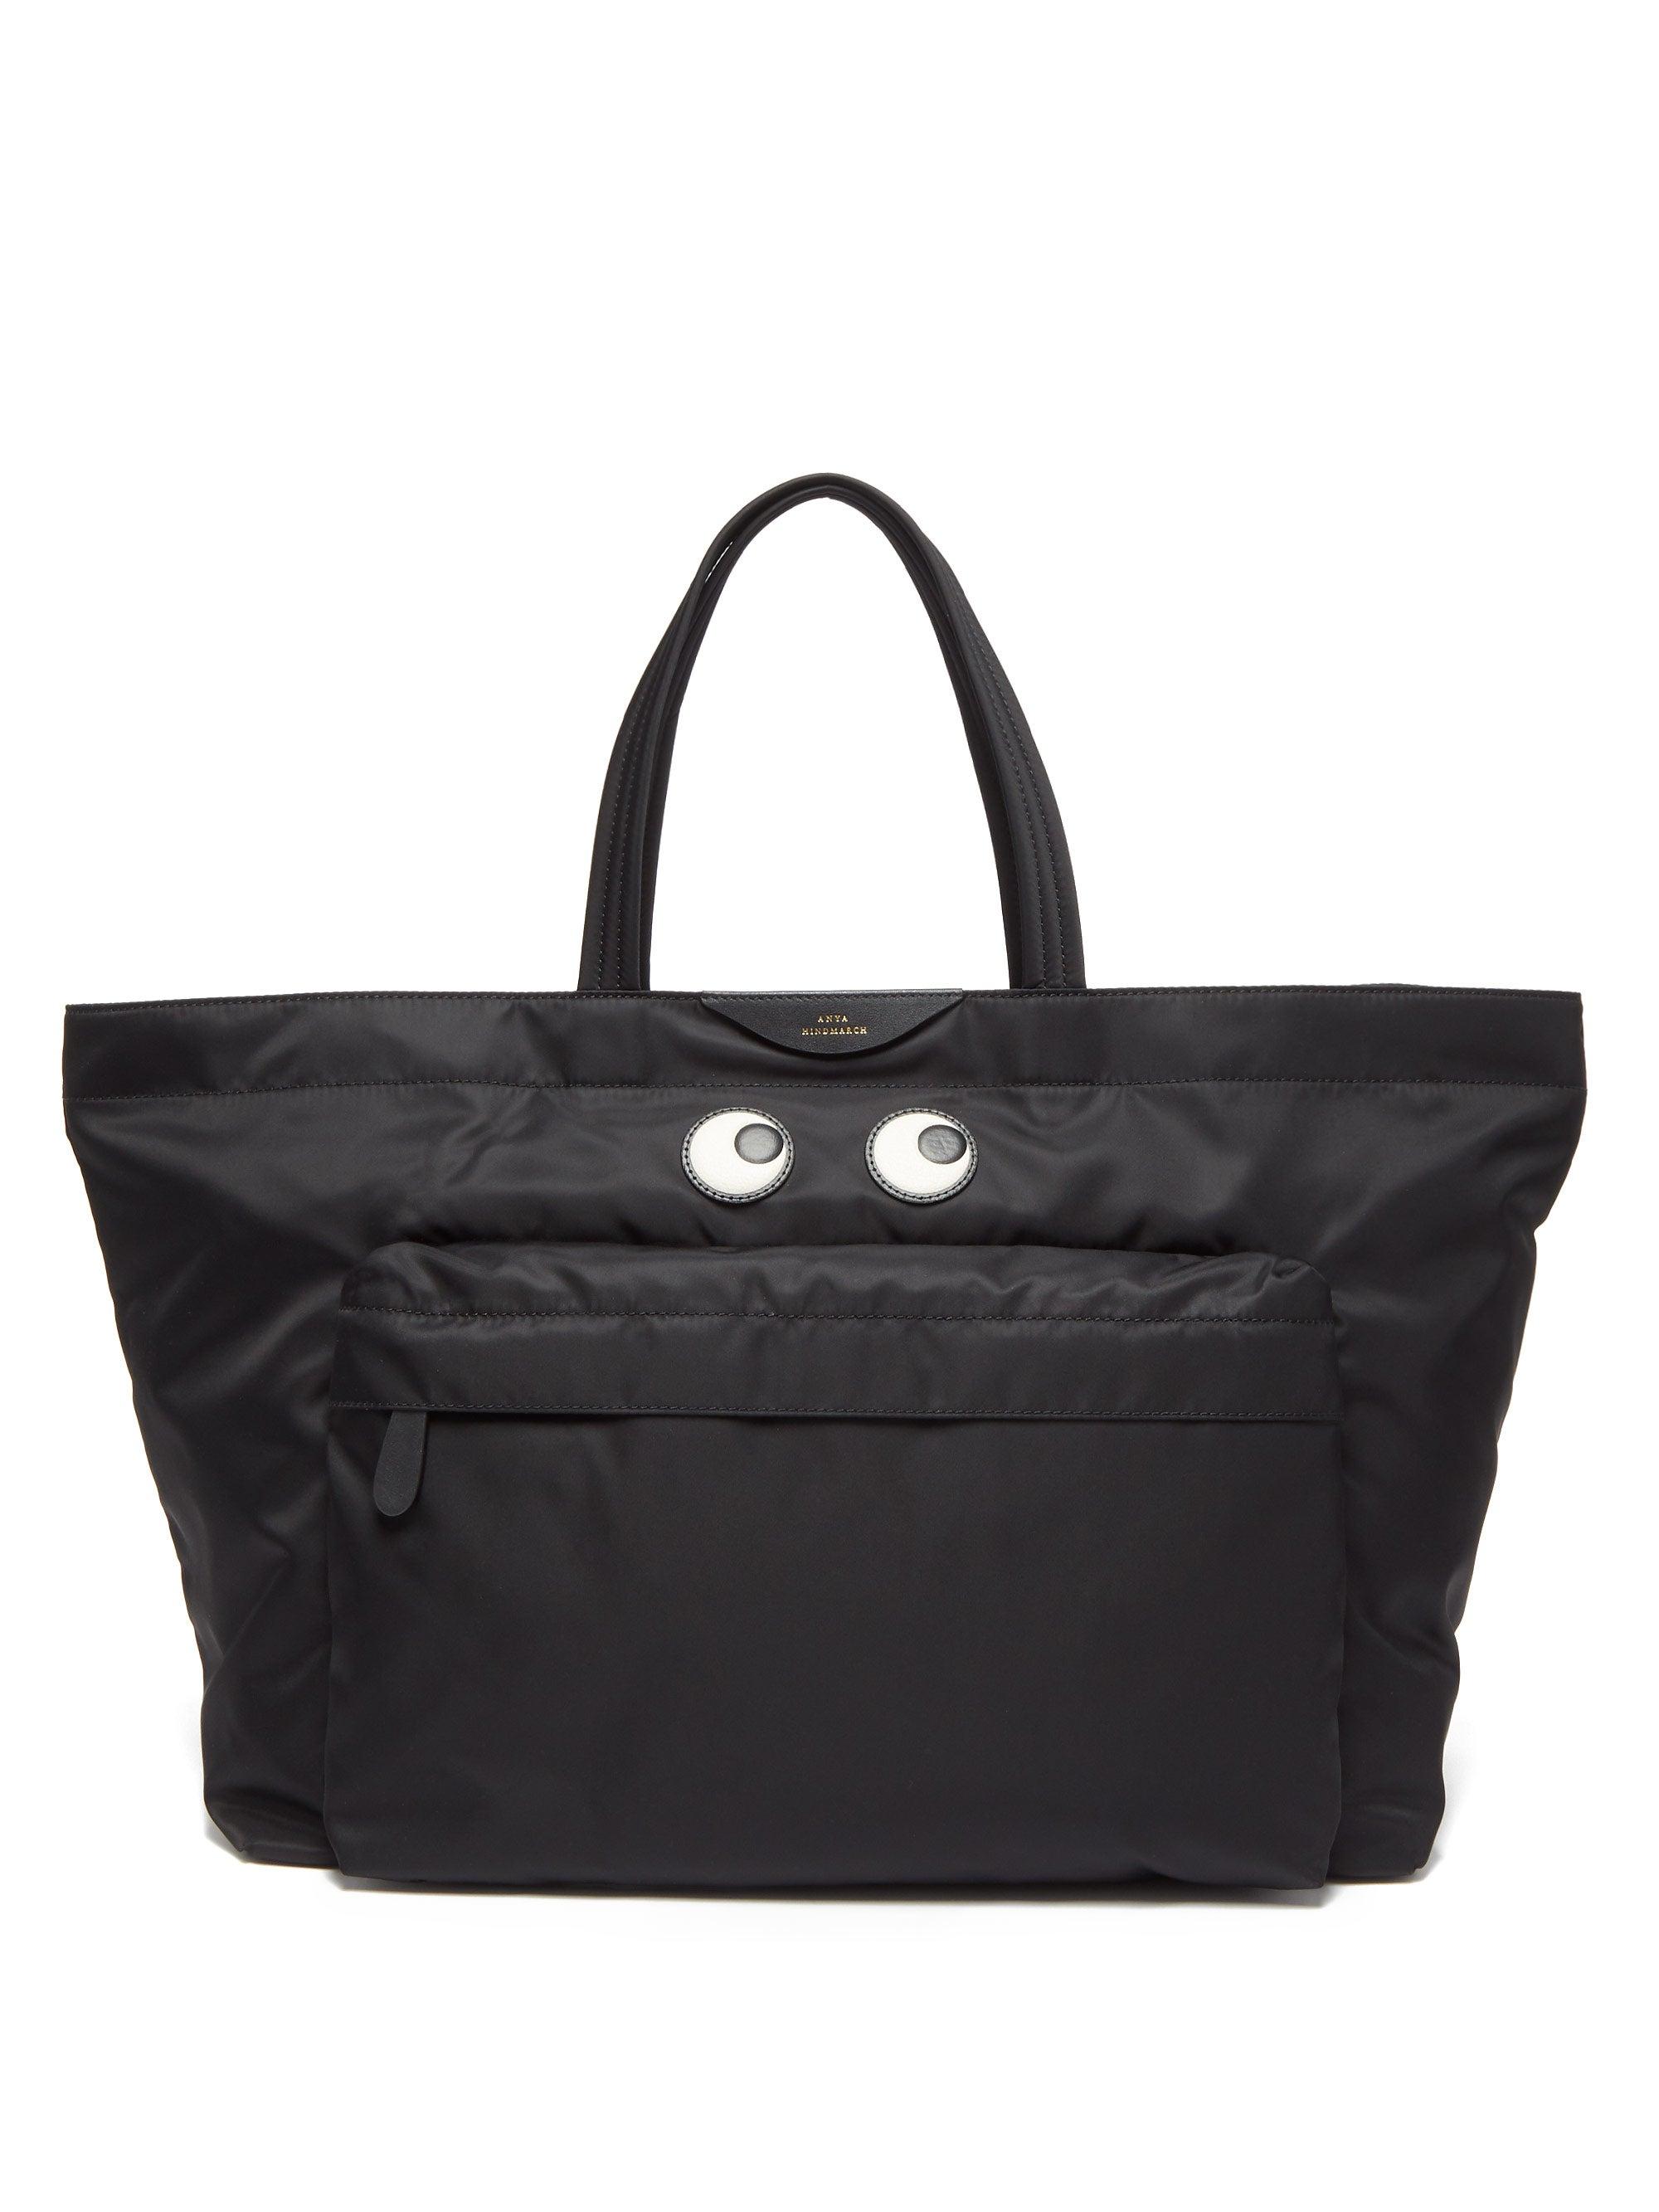 Anya Hindmarch Leather Eyes Large Tote Bag in Black - Lyst